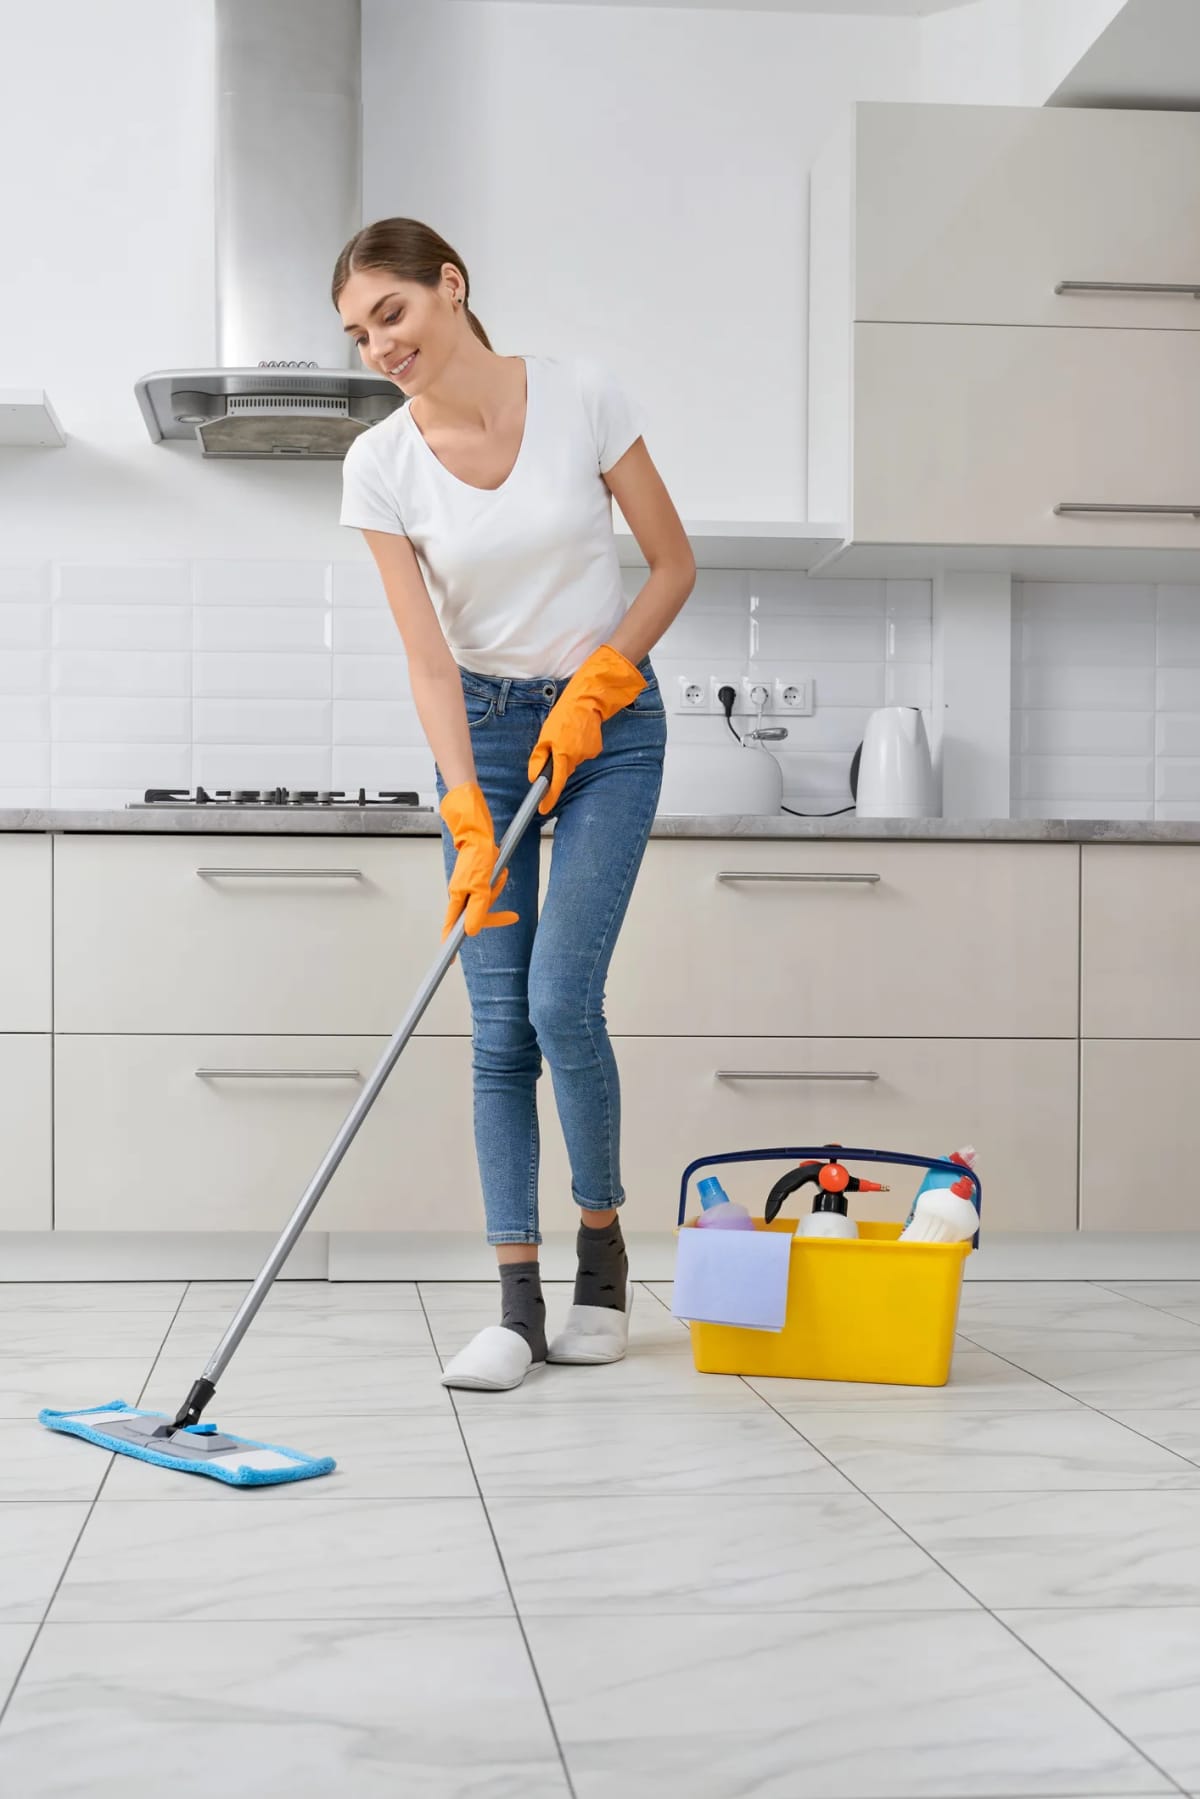 A woman mopping the kitchen floor